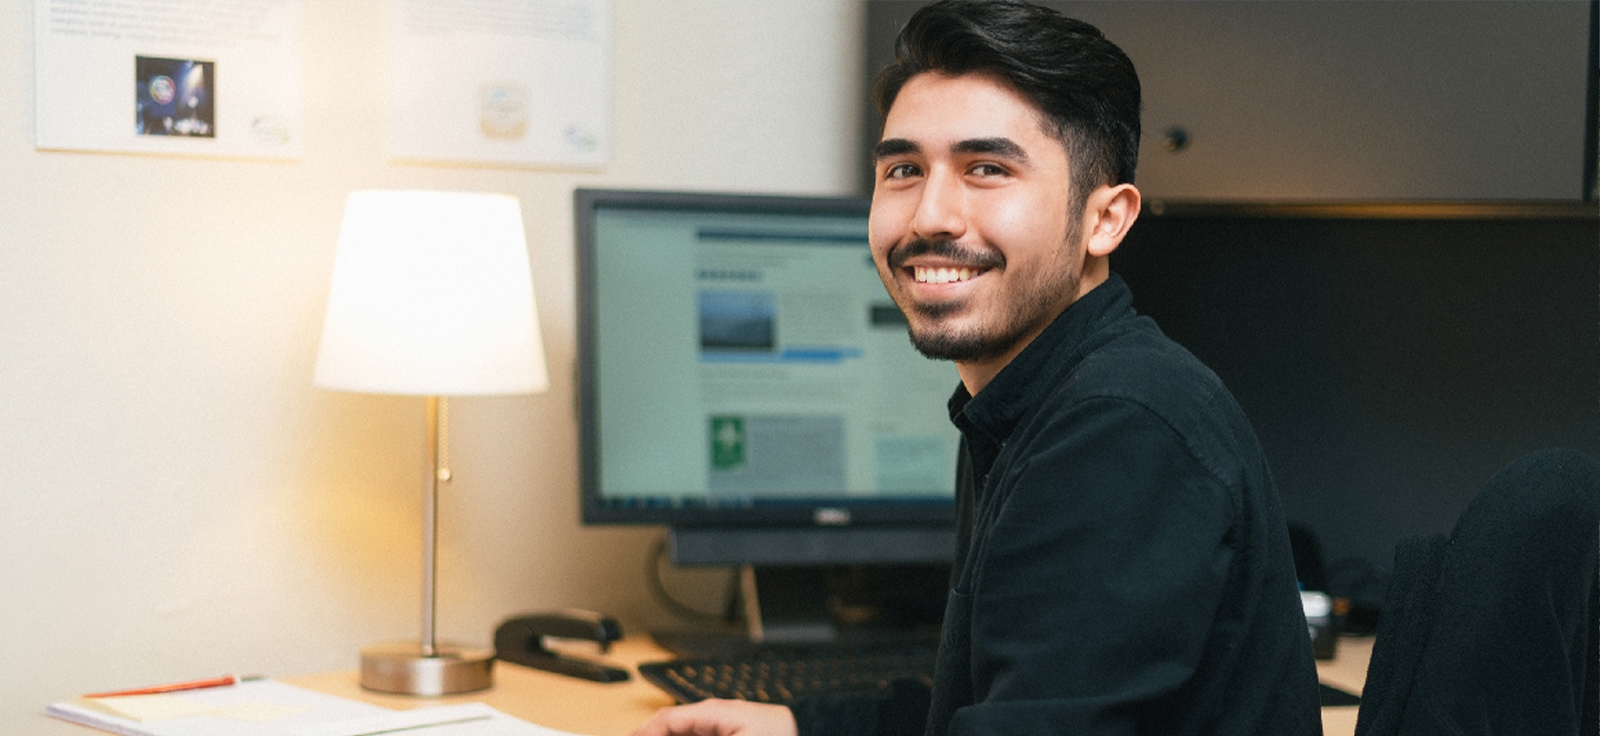 Student at computer smiling